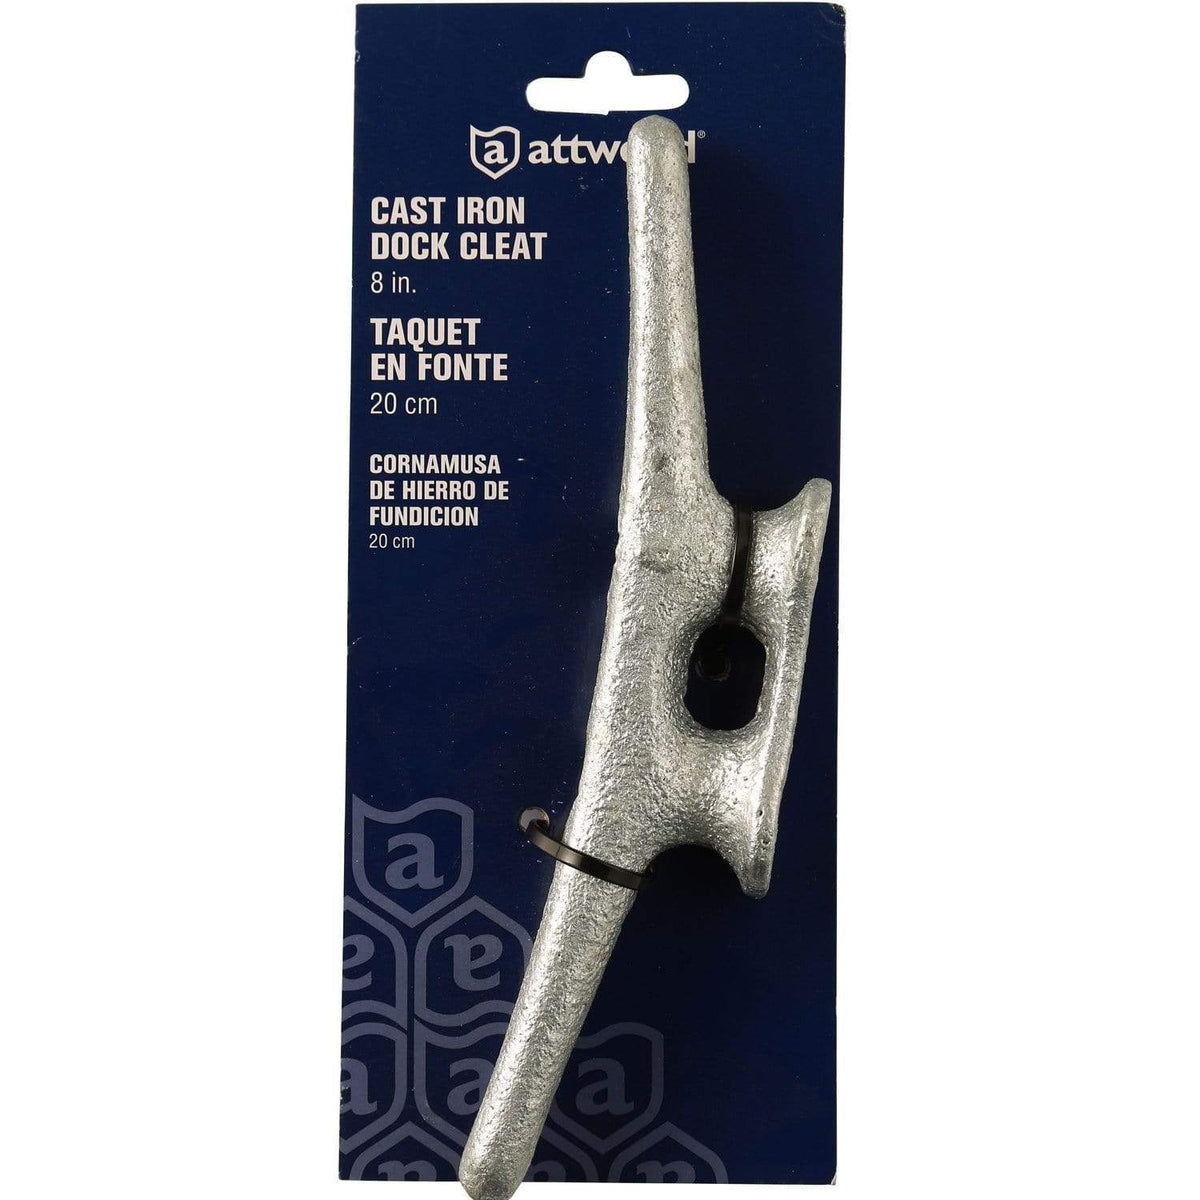 Attwood Dock Cleat Iron 8" #12102L3